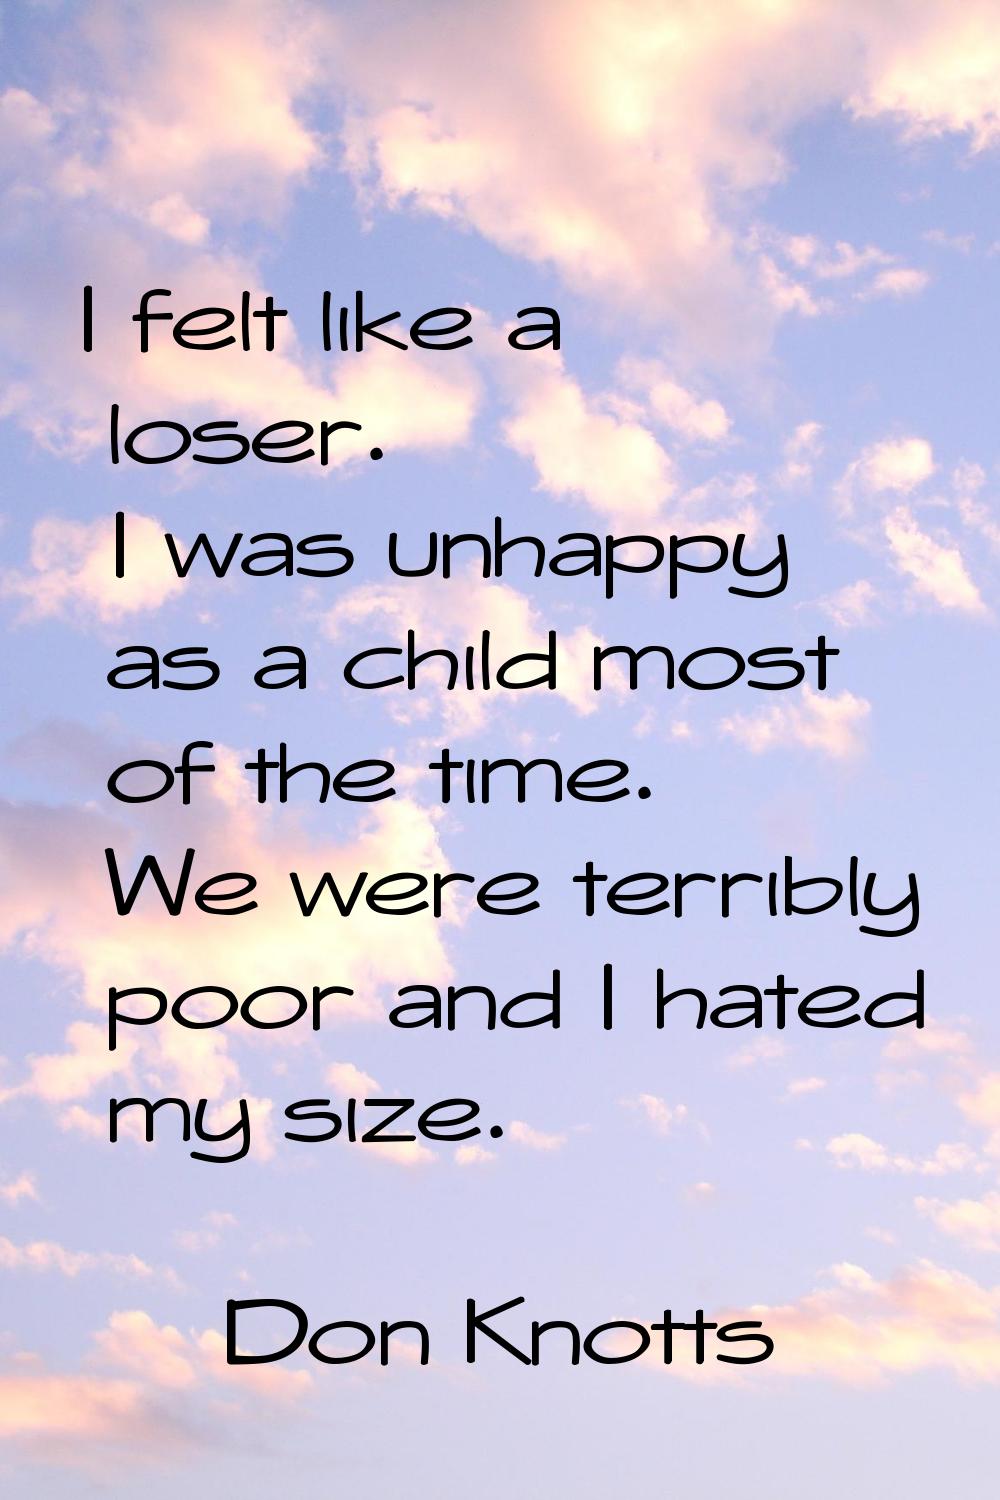 I felt like a loser. I was unhappy as a child most of the time. We were terribly poor and I hated m